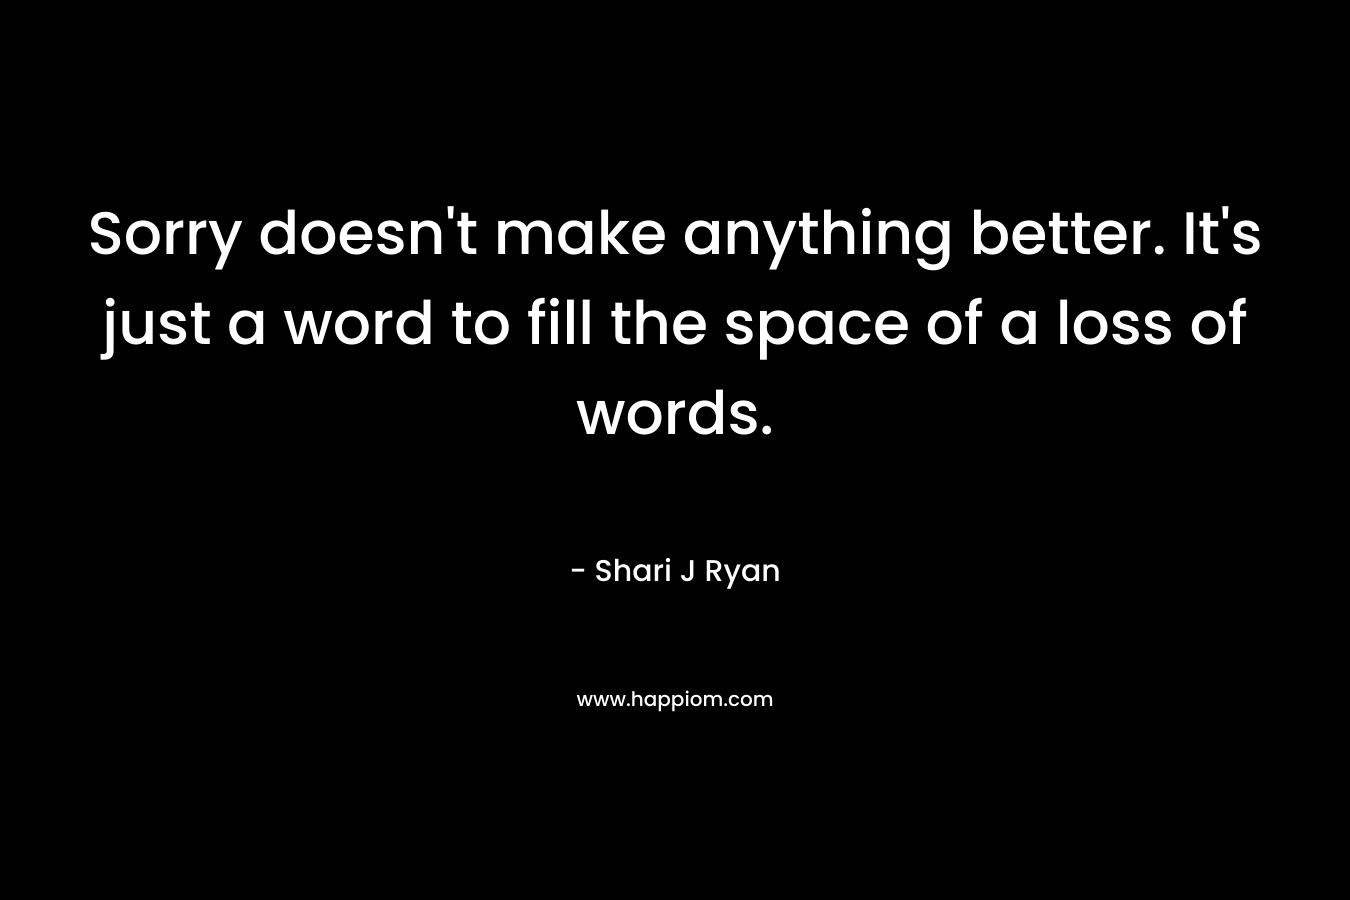 Sorry doesn't make anything better. It's just a word to fill the space of a loss of words.